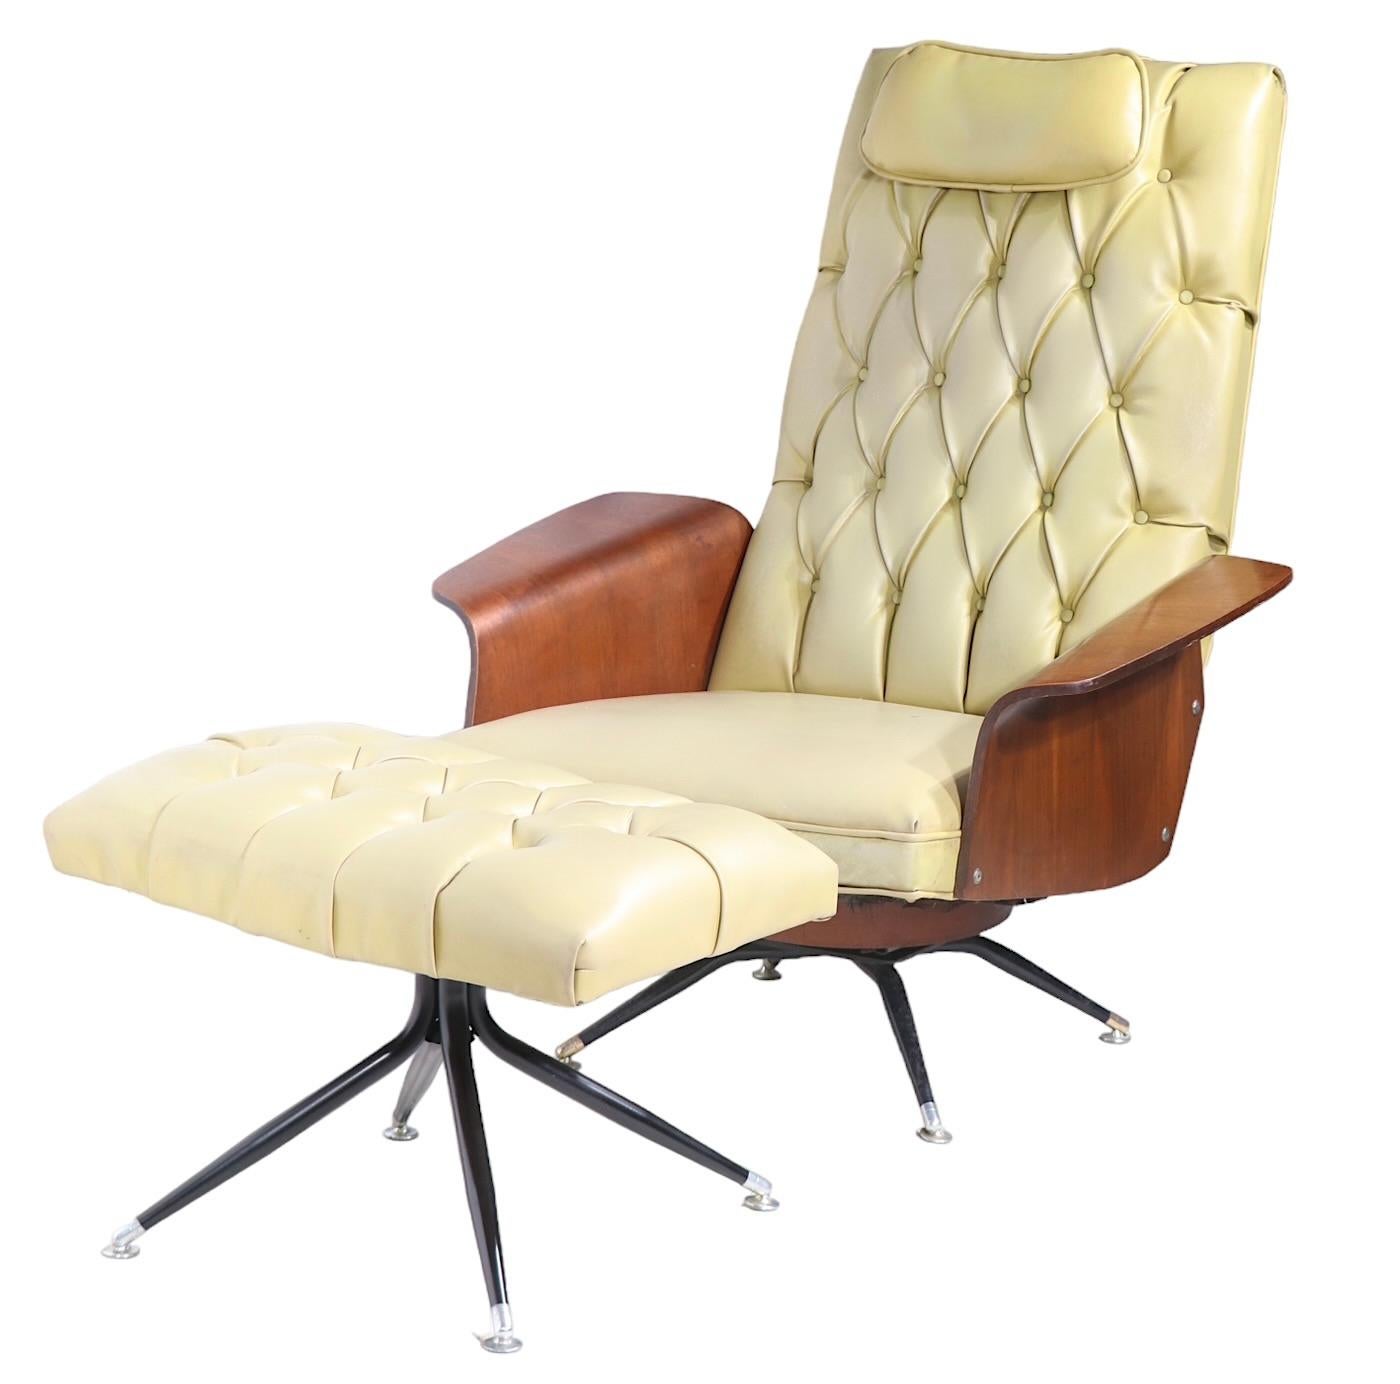 Mid-Century Modern Mid Century Lounge Chair and Ottoman by Murphy Miller for Plycraft c 1950’s For Sale